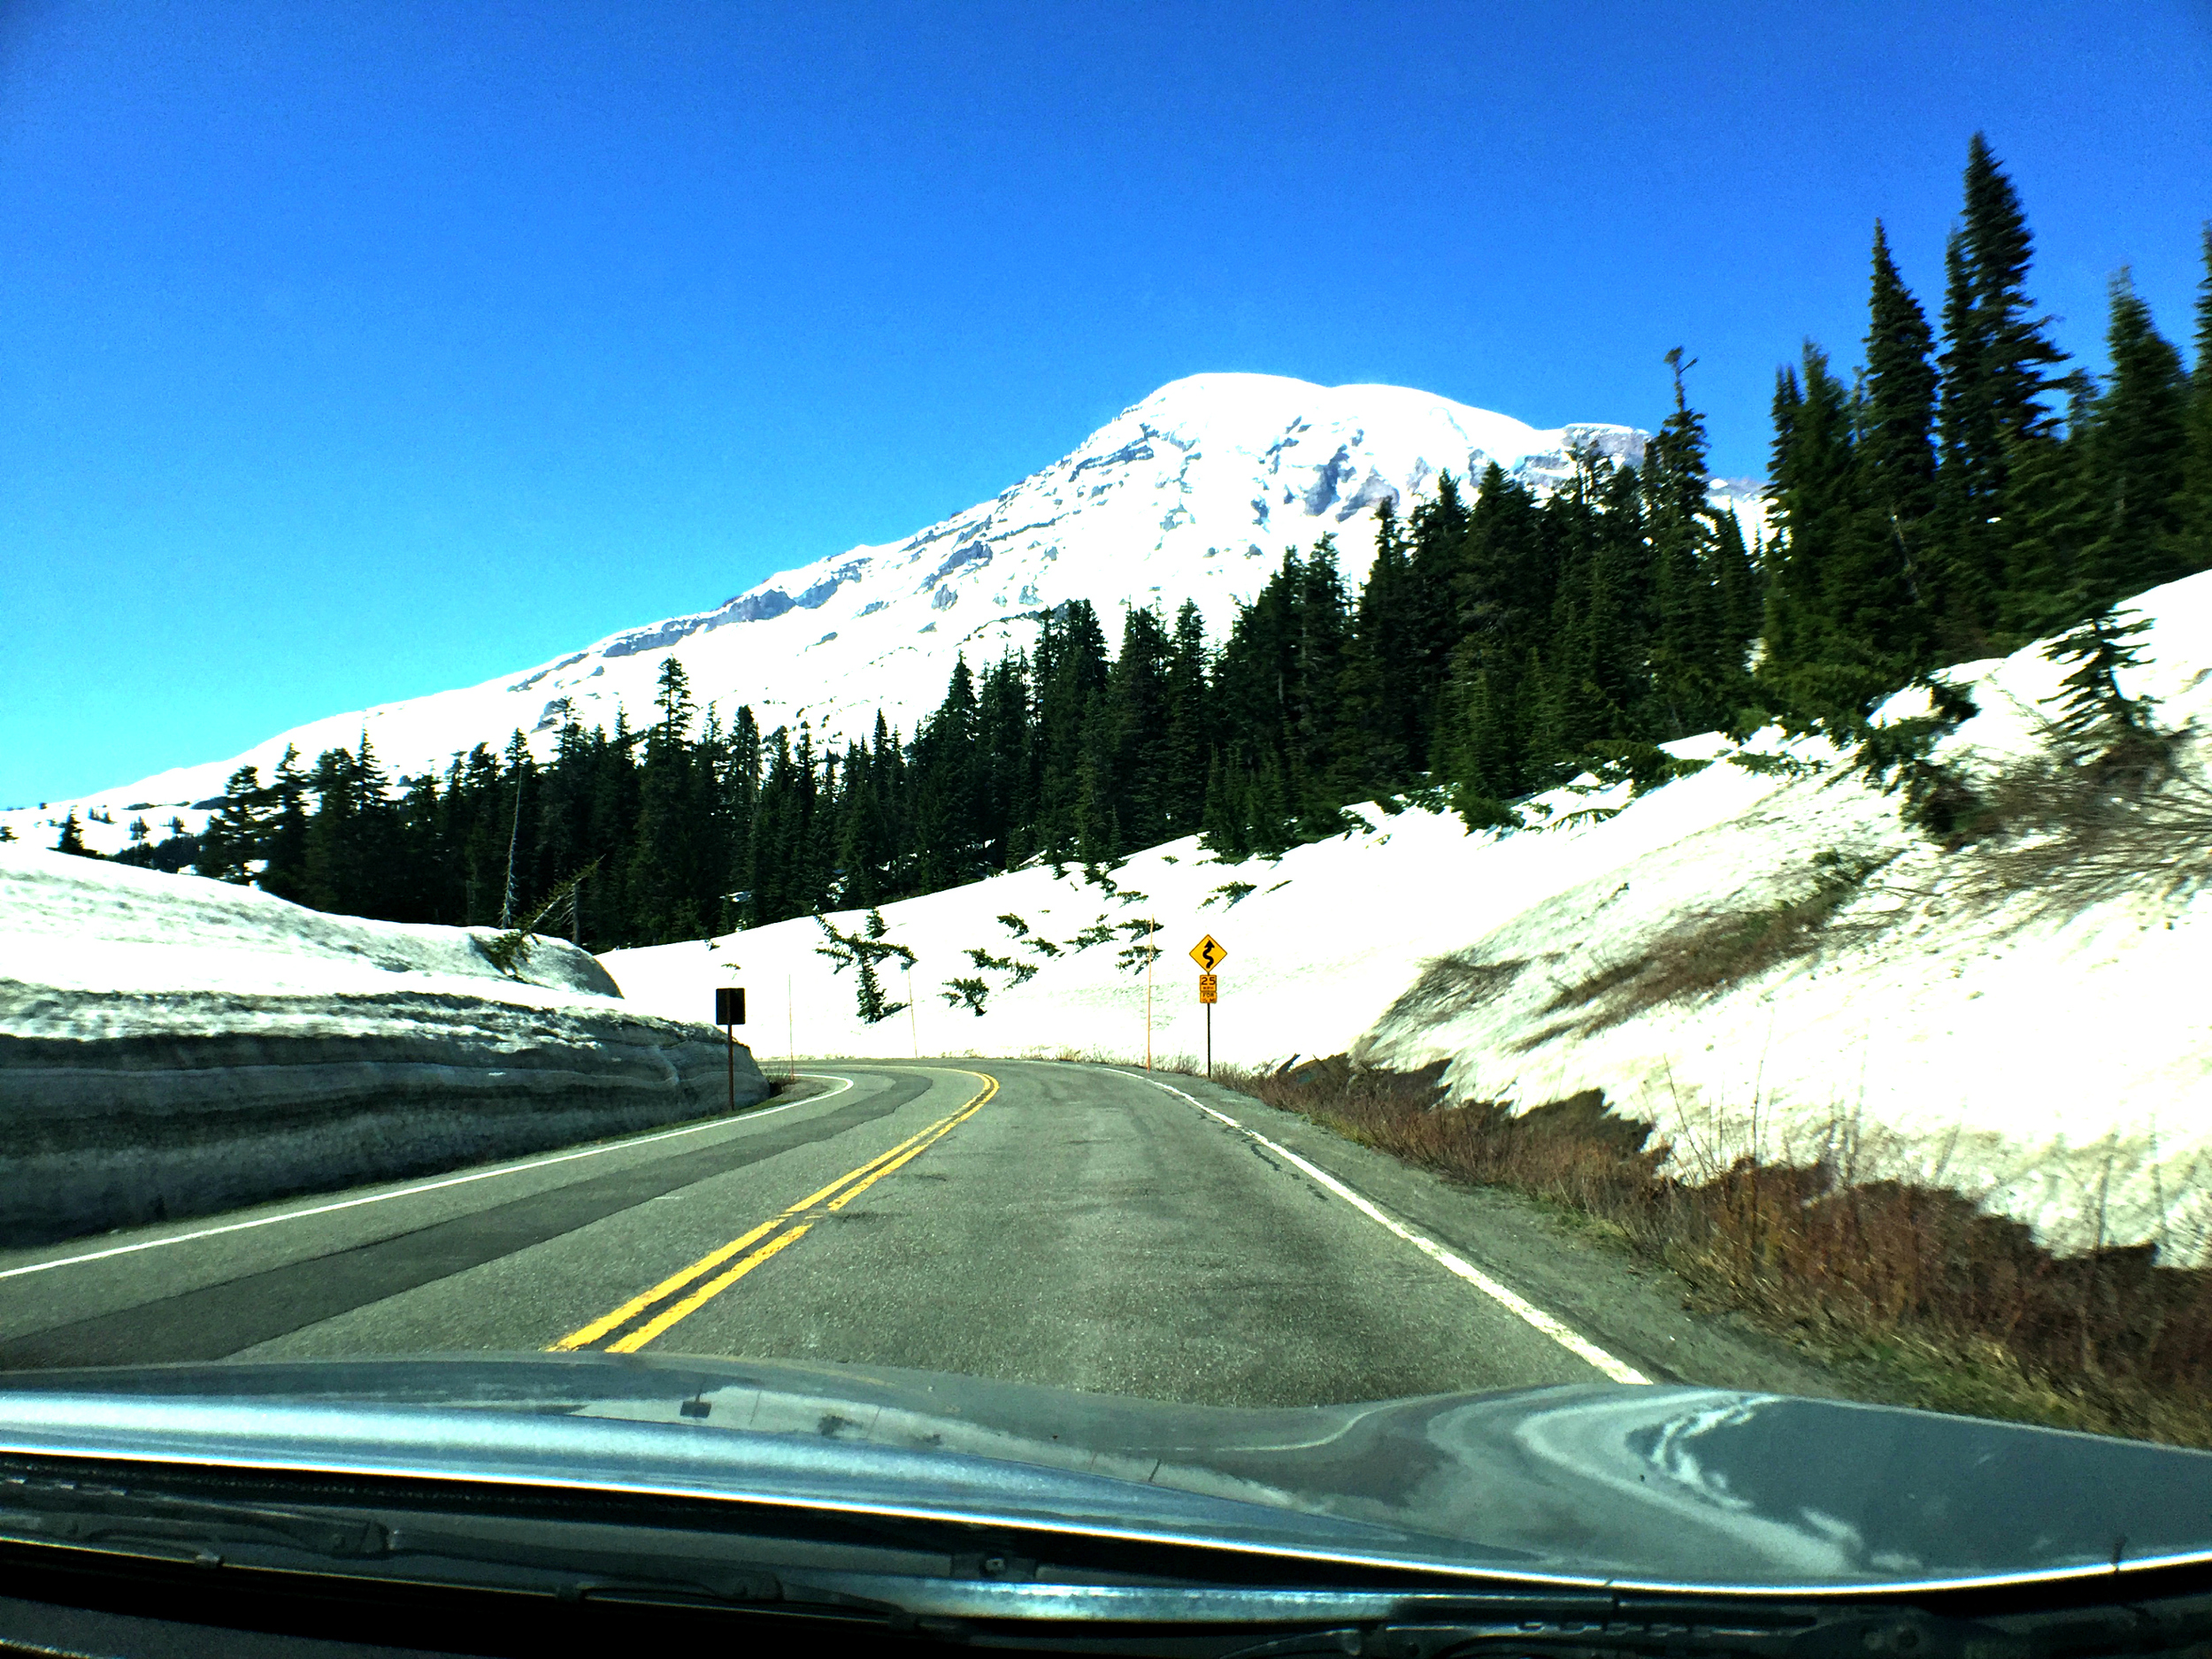 Nearing the top of Mount Rainier. Despite all the snow, it wasn't cold at all and I actually had on shorts. So crazy!